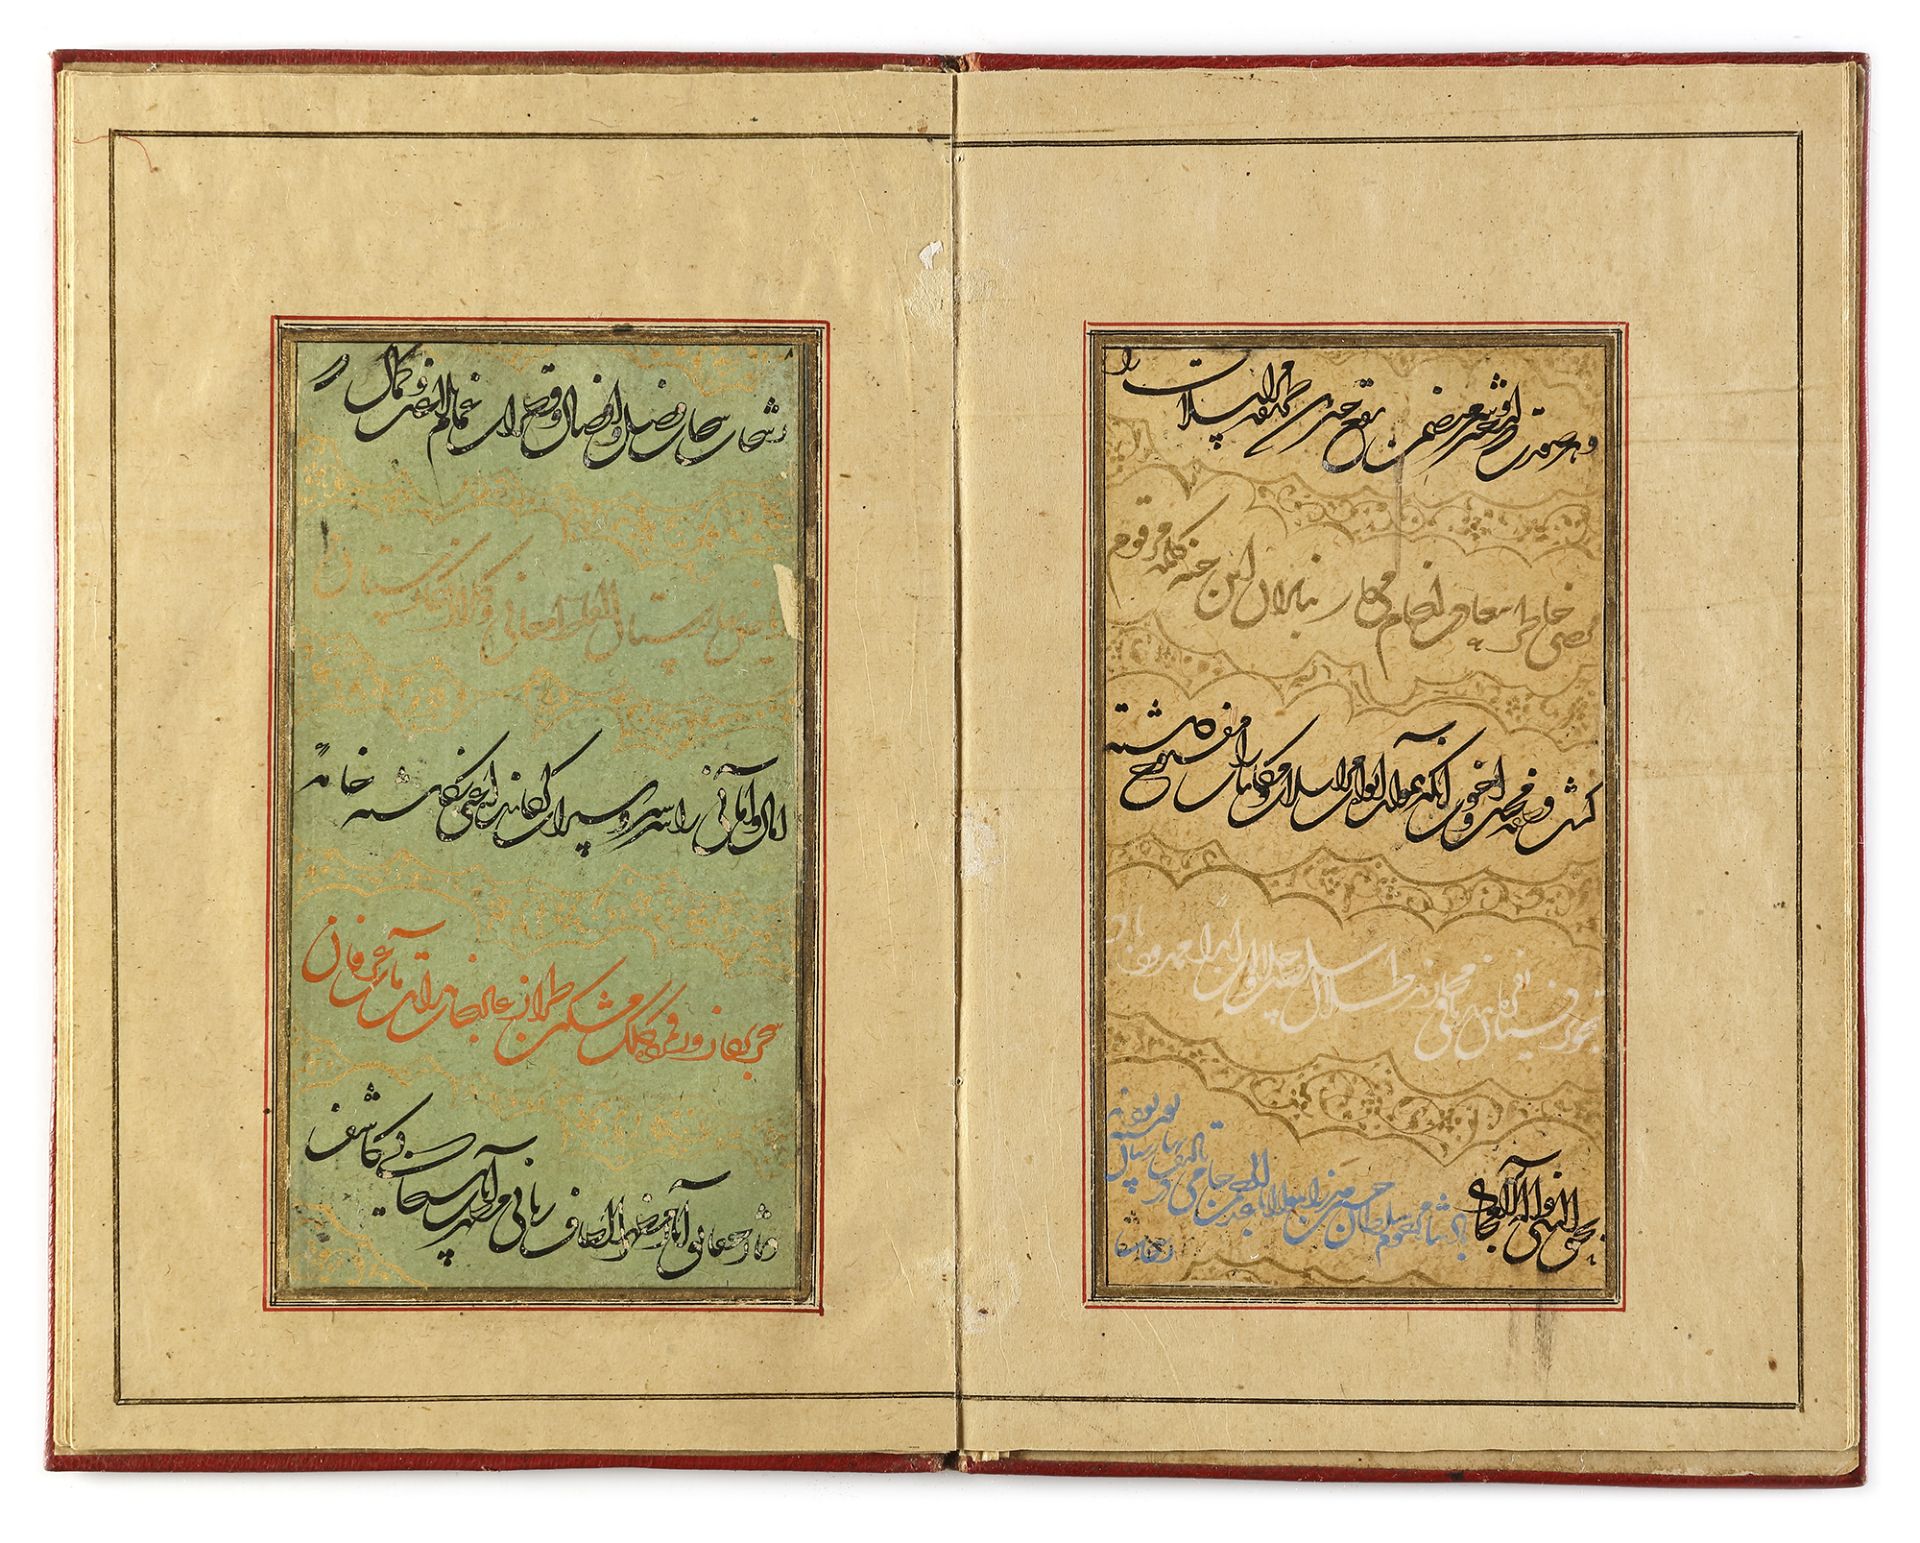 A MANUSCRIPT OF POETRY, SIGNED BY IKHTIYAR AL-MUNSHI, PERSIA, SAVAFID, DATED 975 AH/1567-68 AD - Image 15 of 18